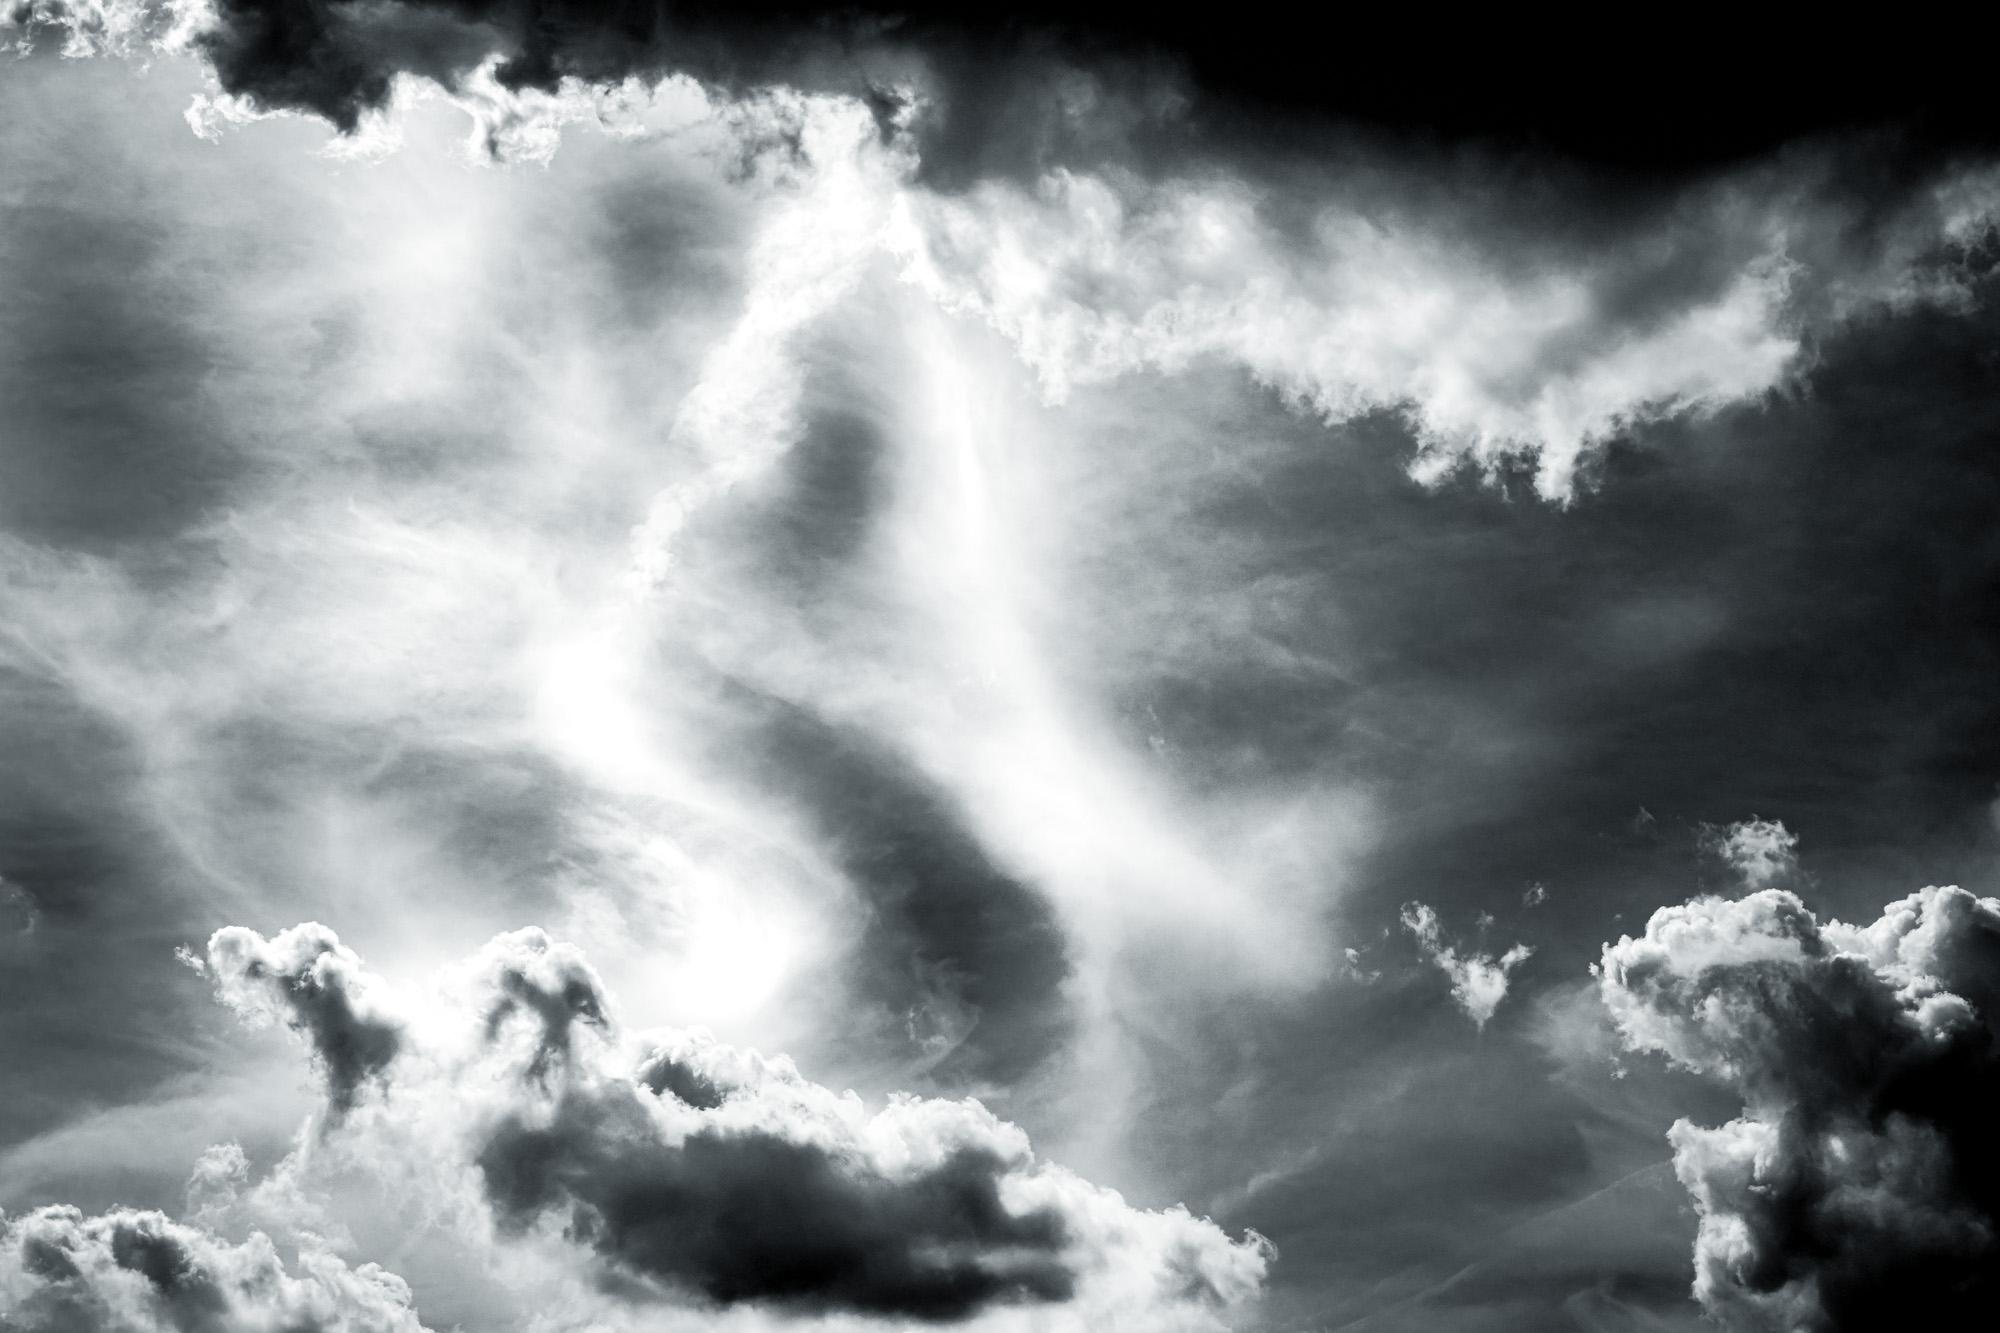 Limited edition black and white photograph. This image is "Howling Sky" from the Aerials series.

I’ve long been fascinated by weather and most recently climate change science. My deepening knowledge of climate change has strongly influenced the